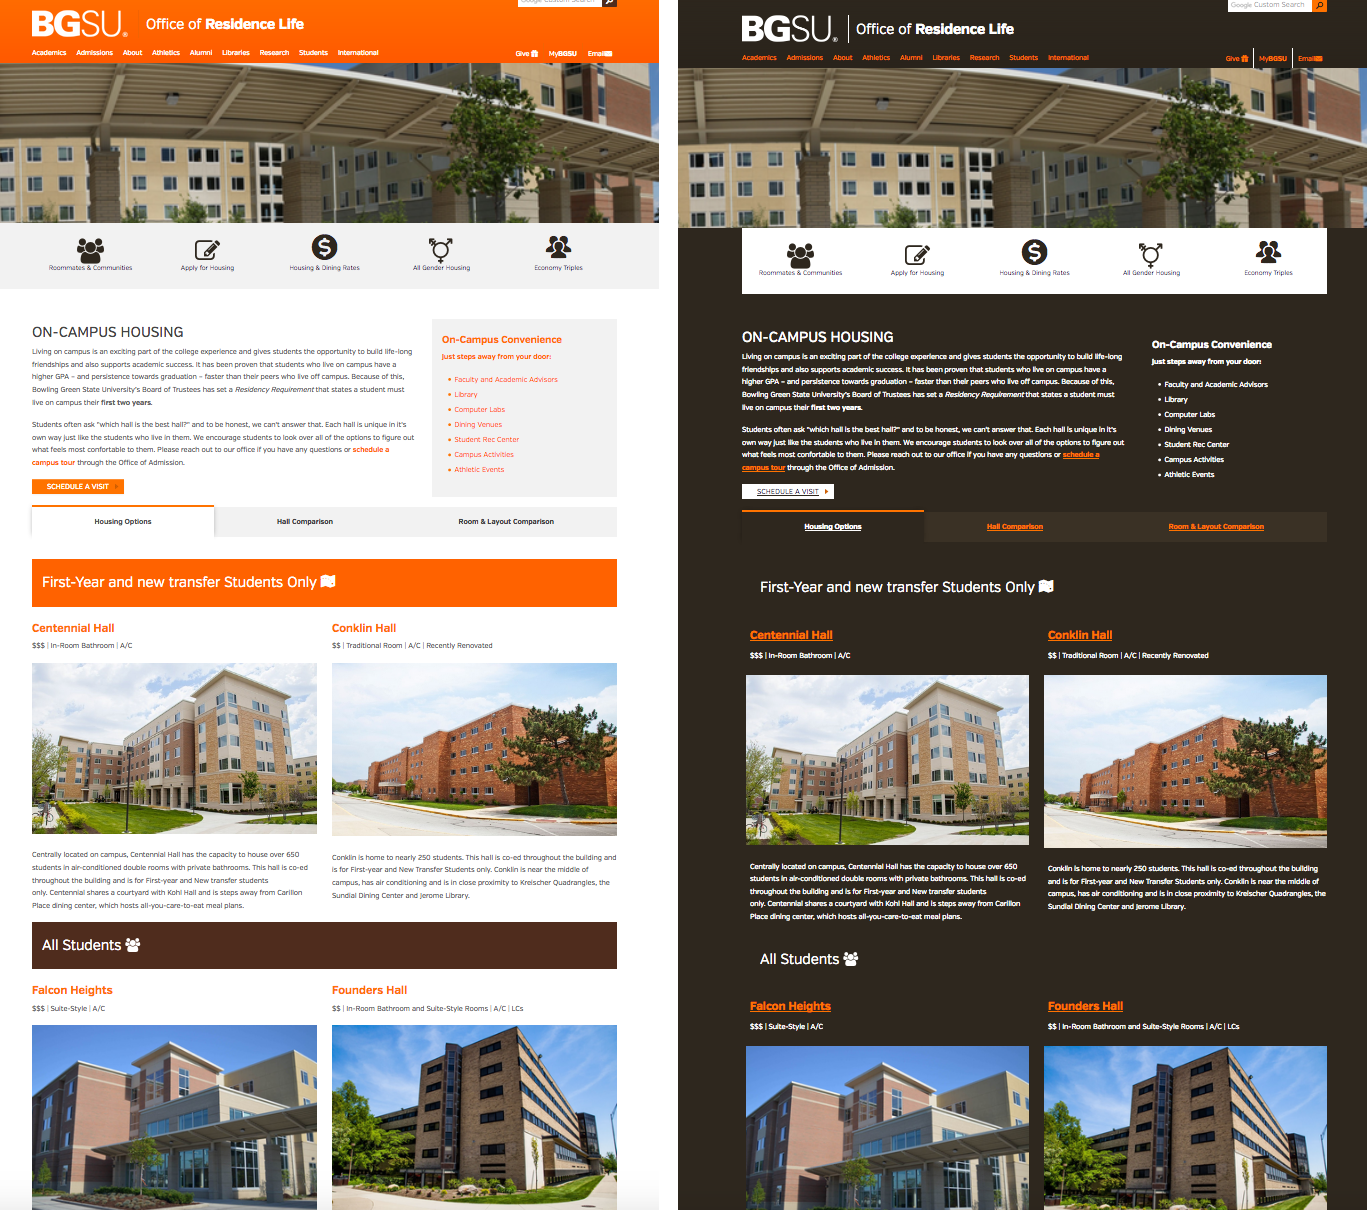 Bowling Green State University webpages, in normal and high-contrast versions.